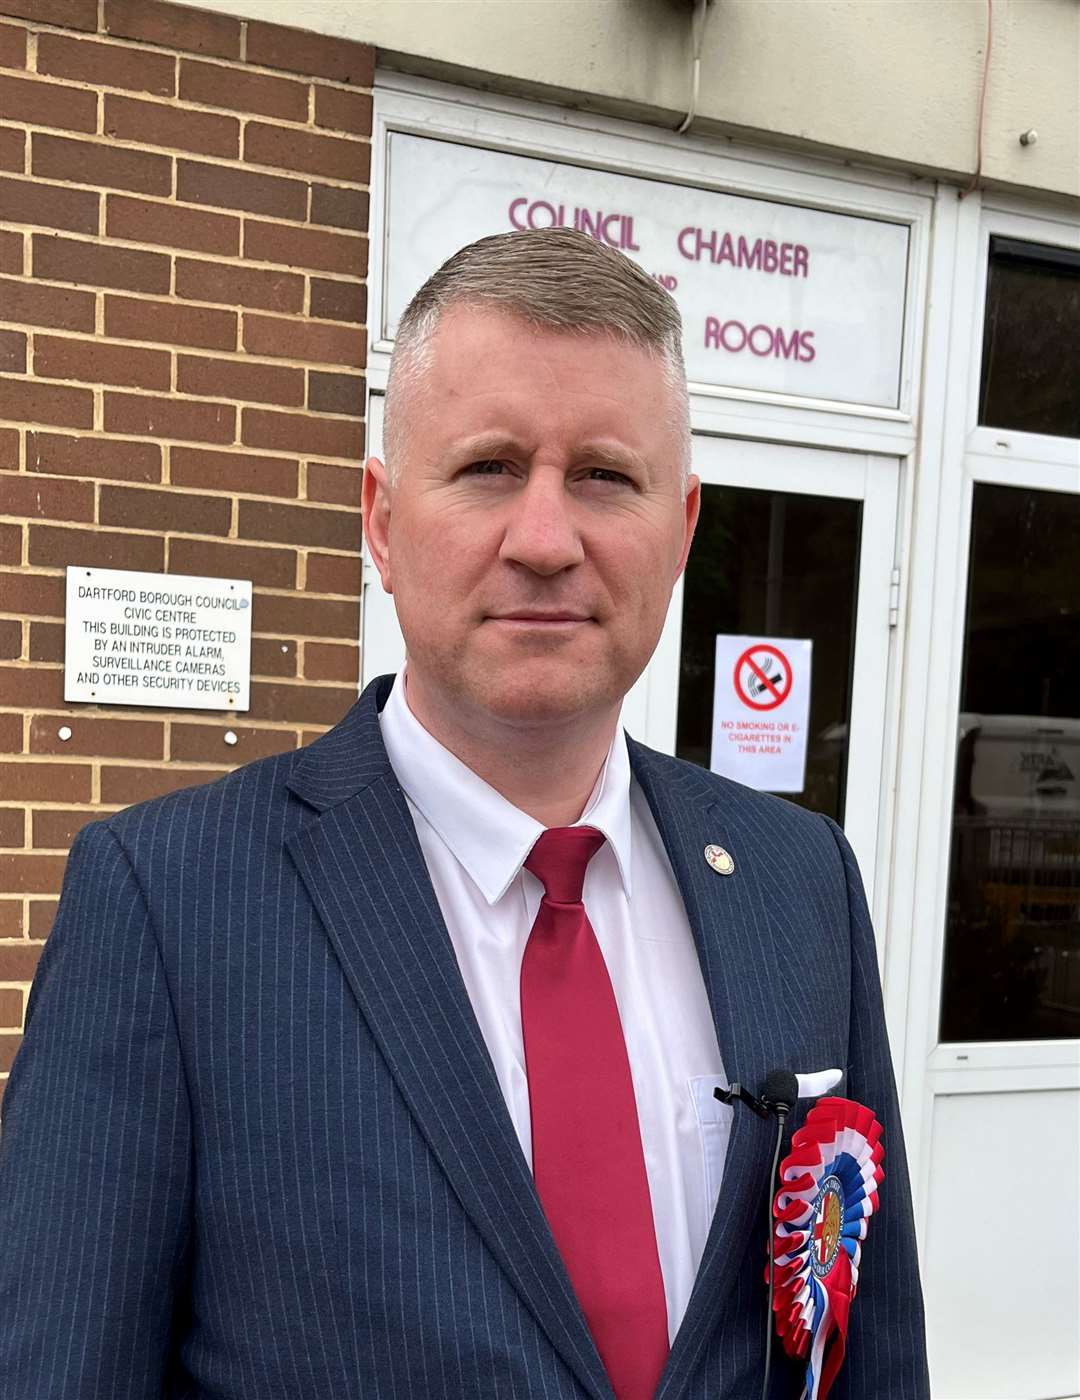 Britain First candidate Paul Golding